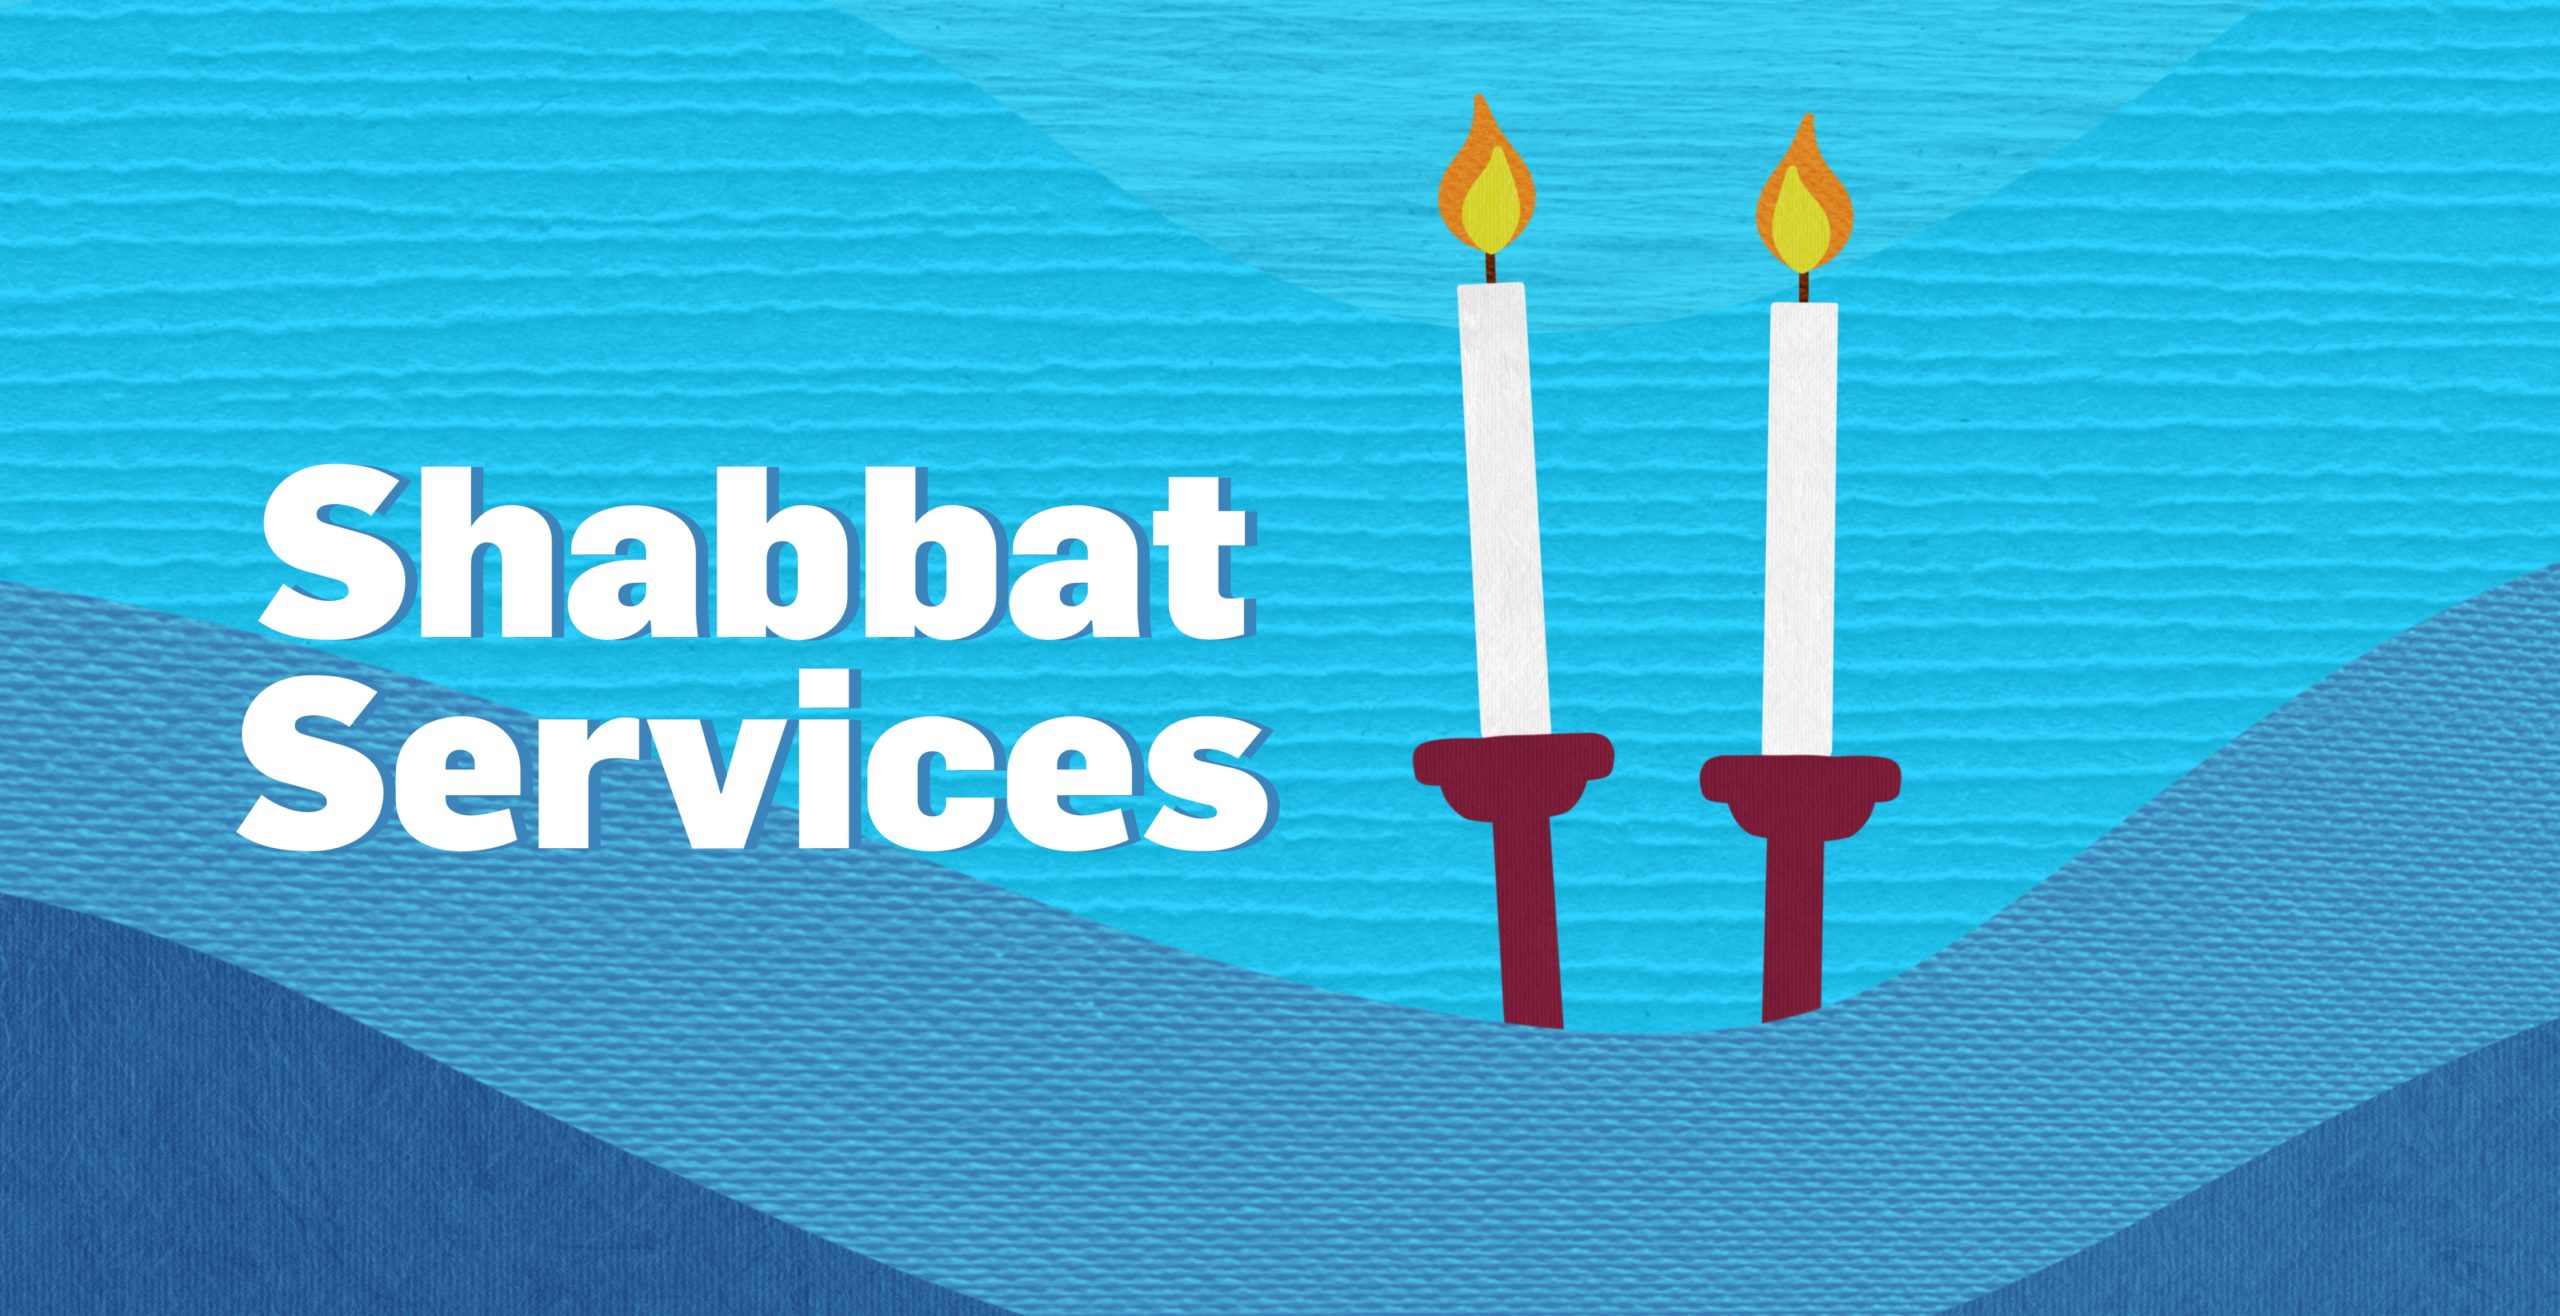 Blue background; two white candles lit next to text that reads "Shabbat Services"